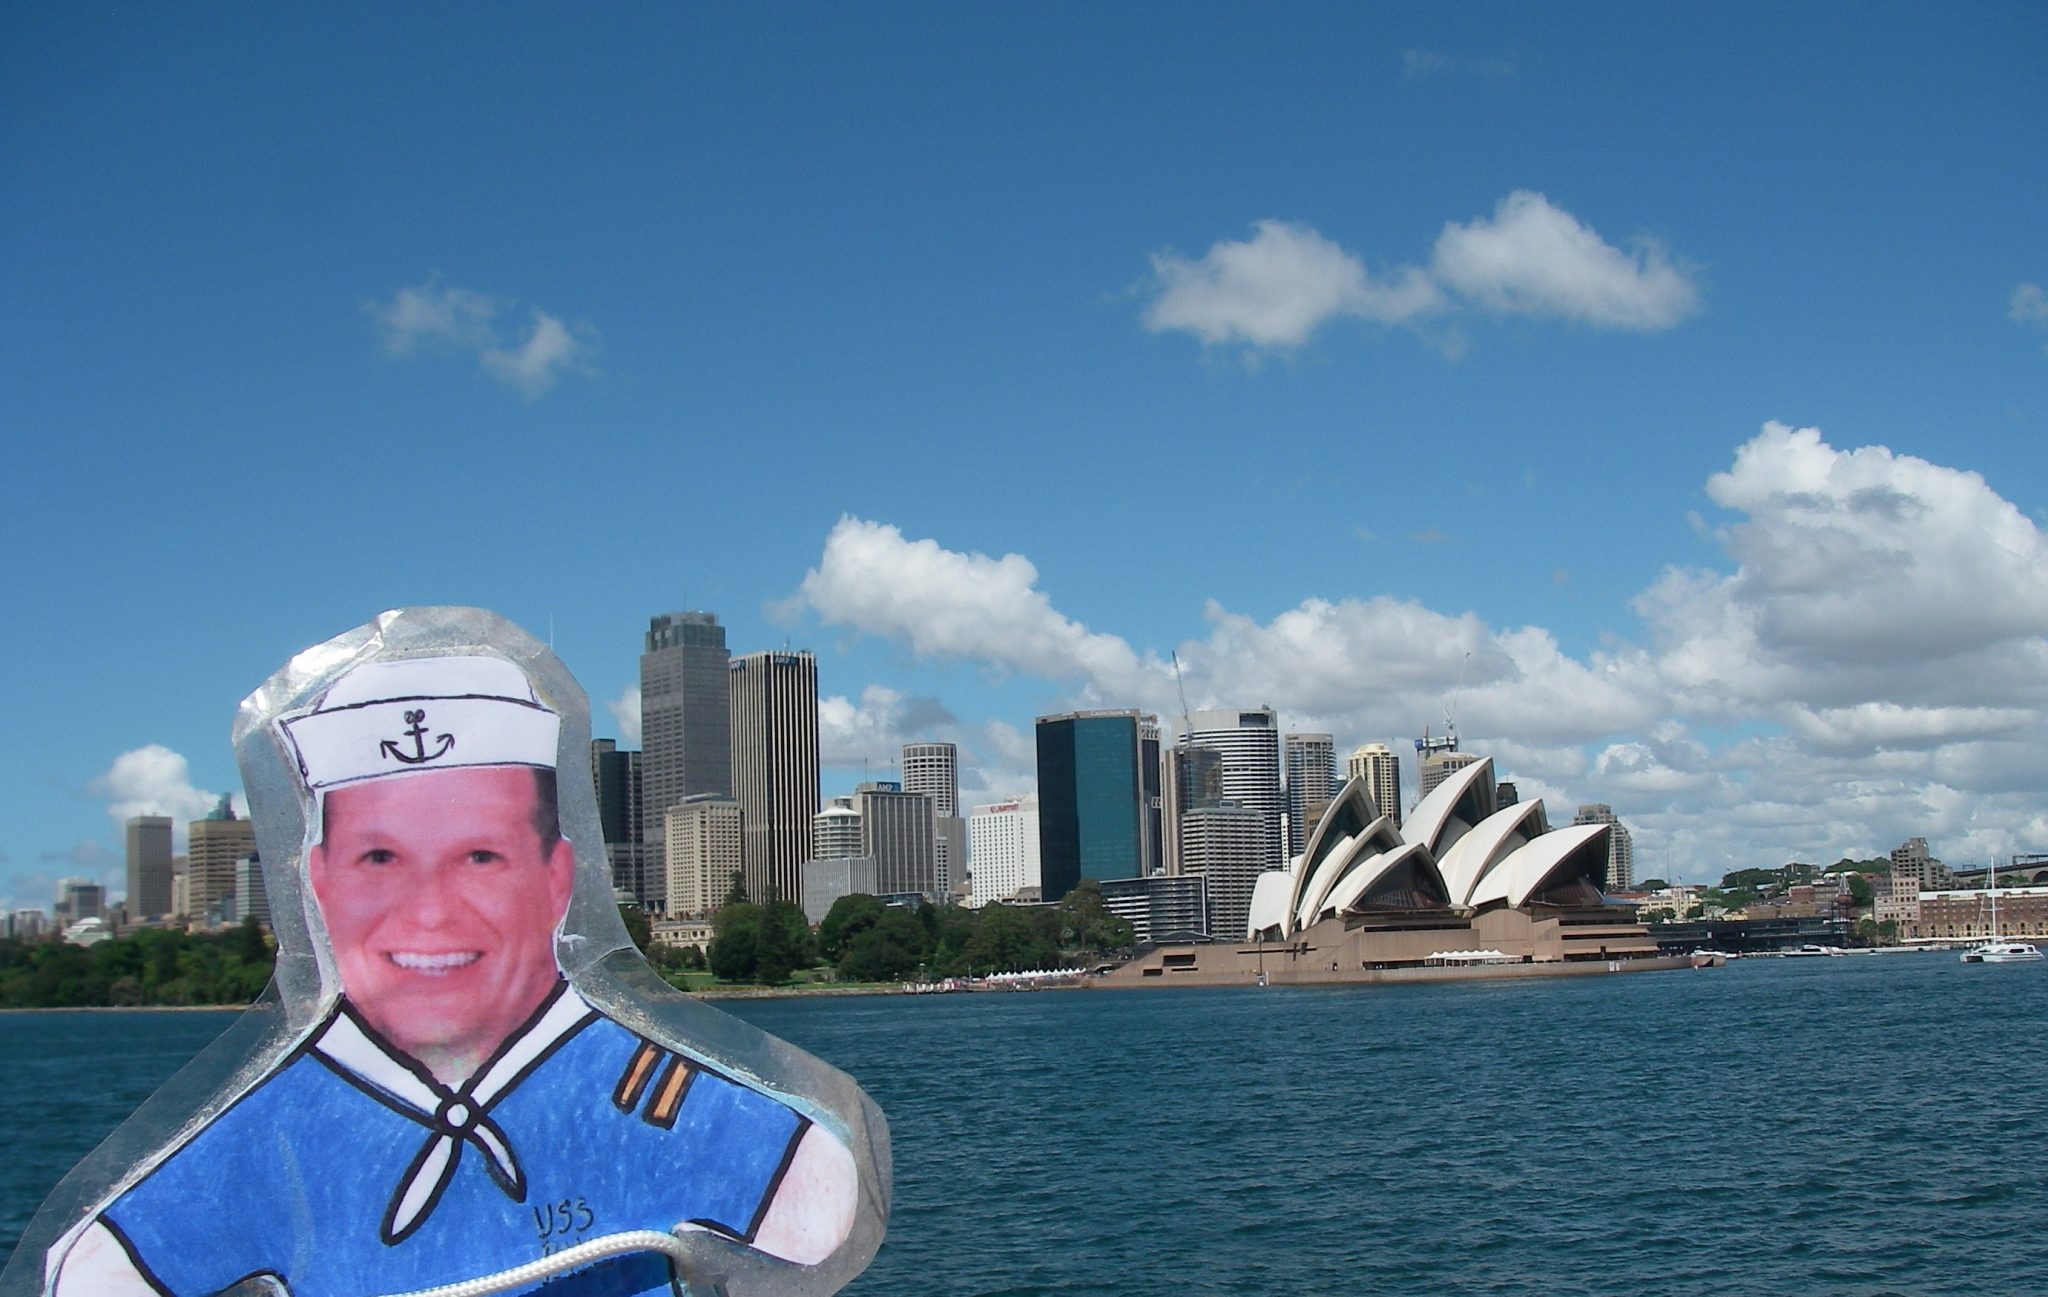 38. Flat Mr. Davis approaches Sydney from a ferry boat.